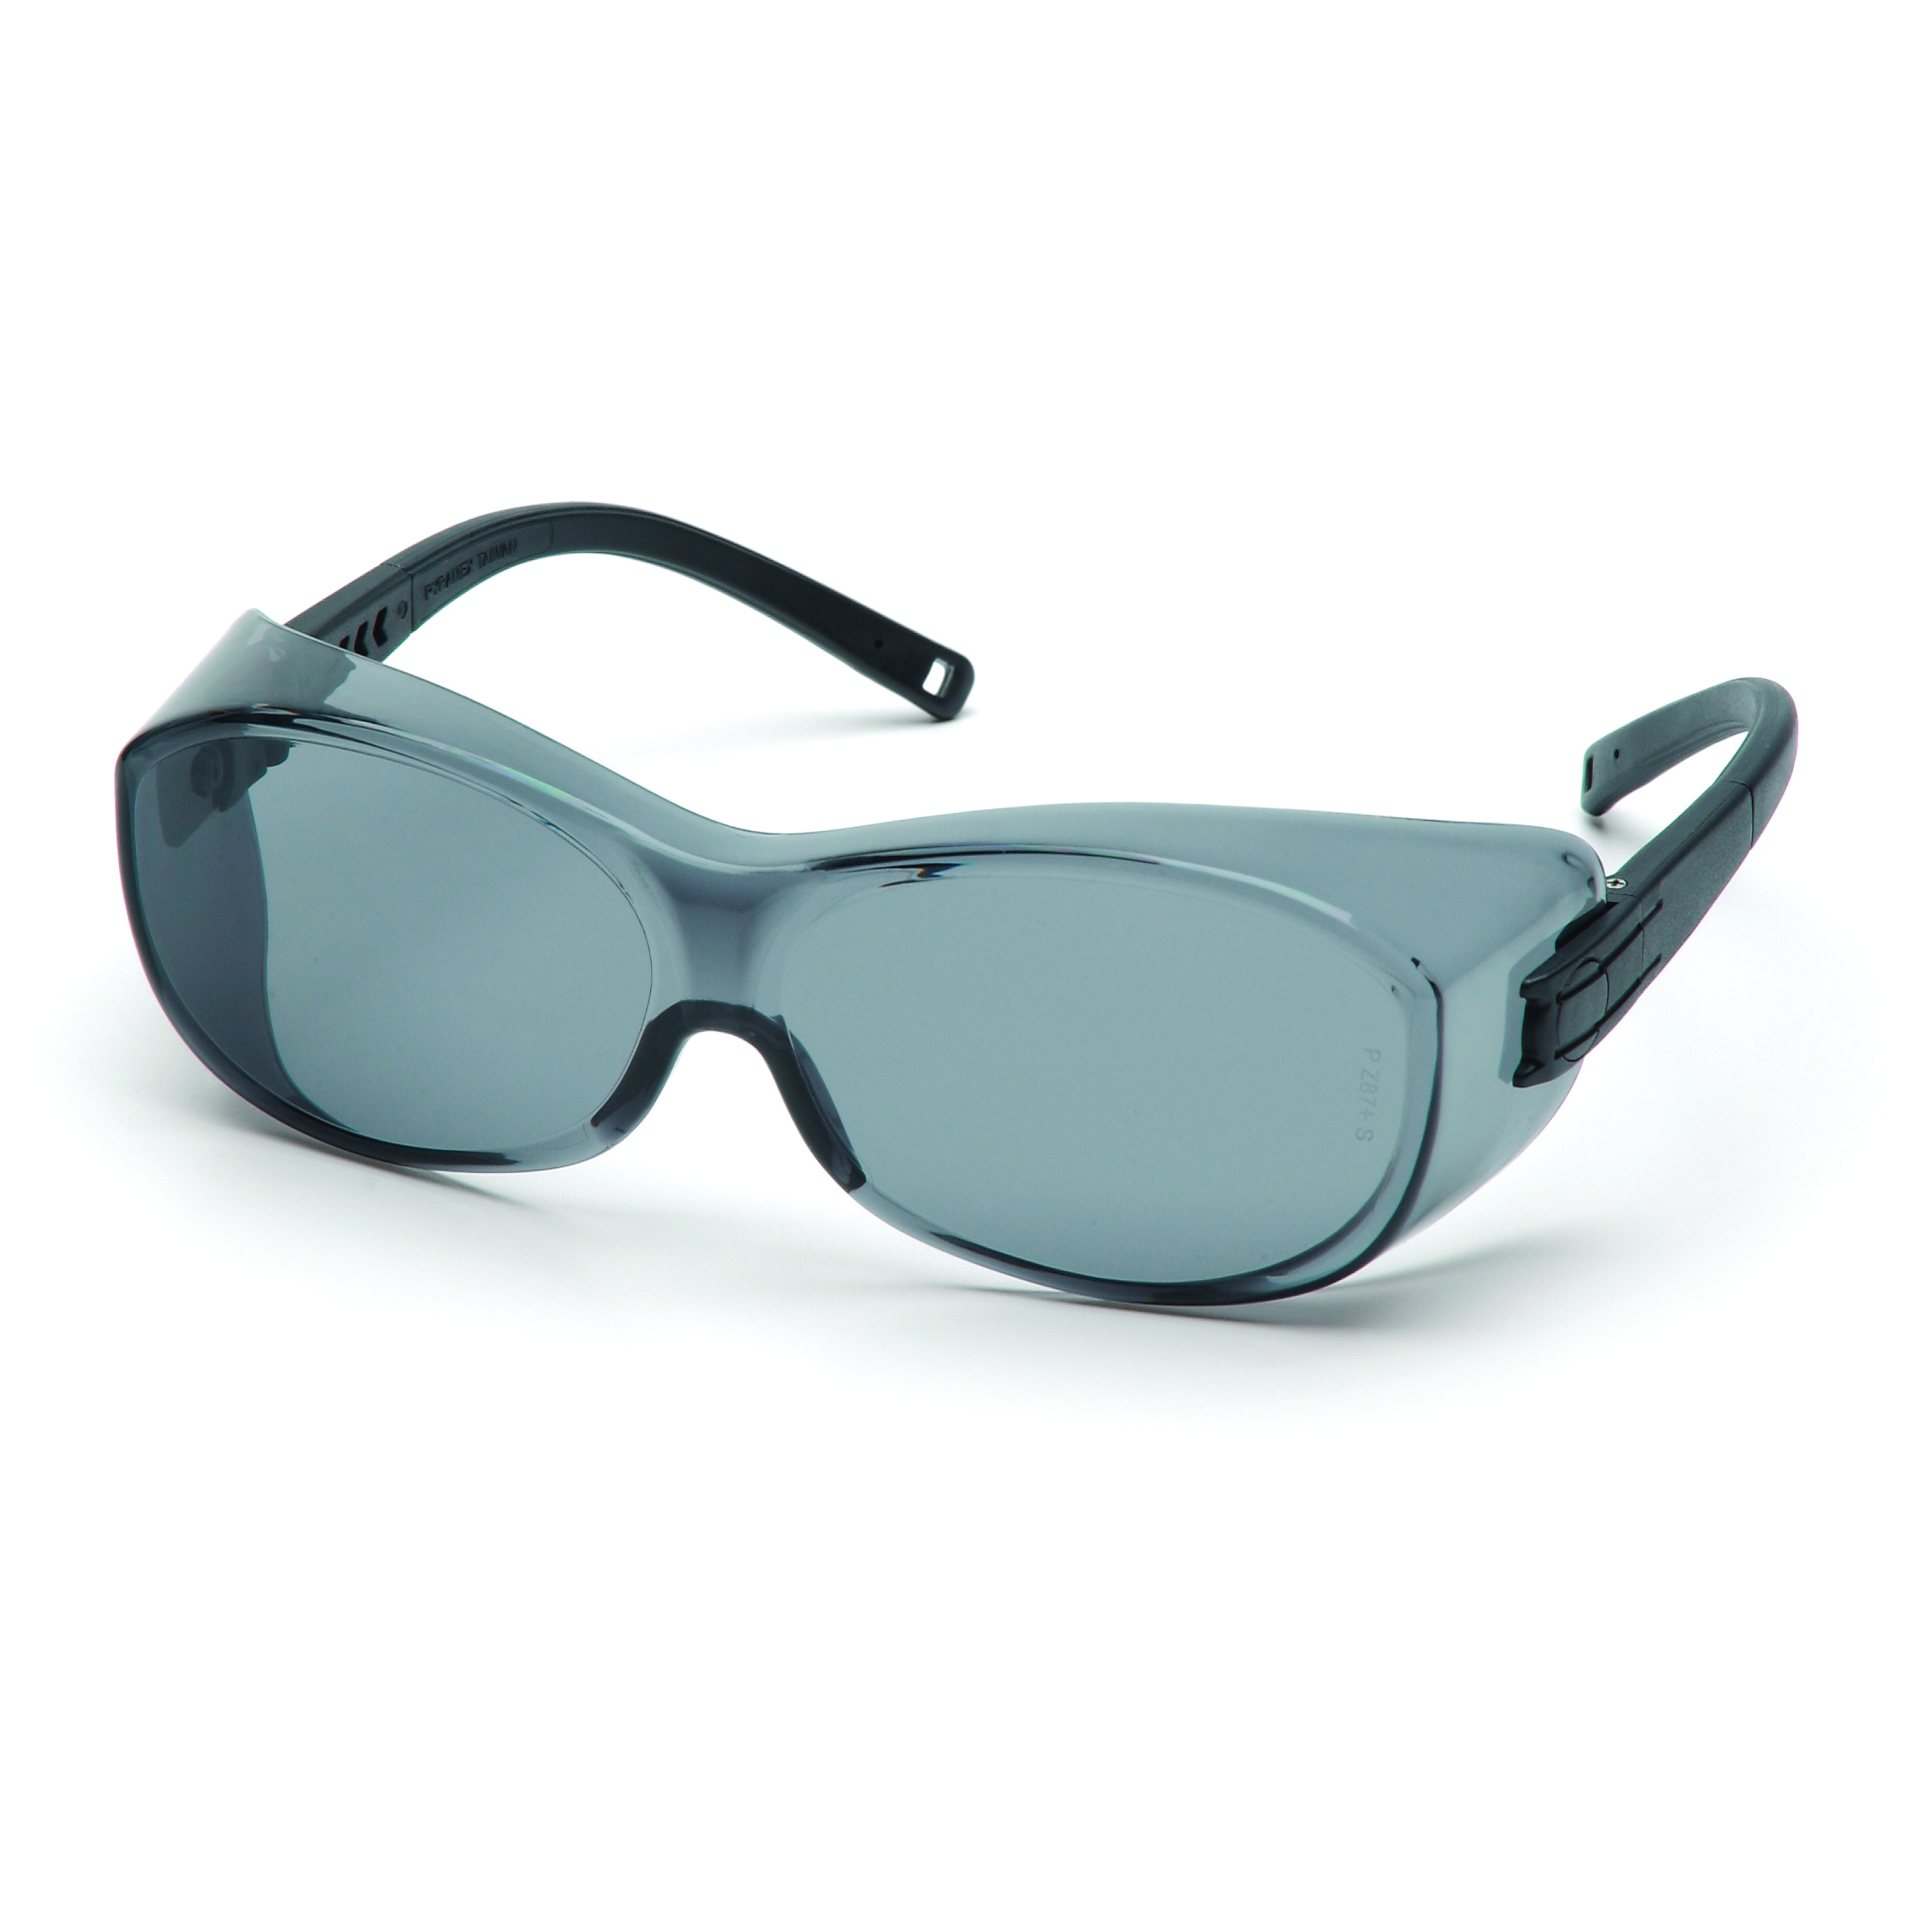 Pyramex OTS Over Rx Safety Glasses with Gray Lens